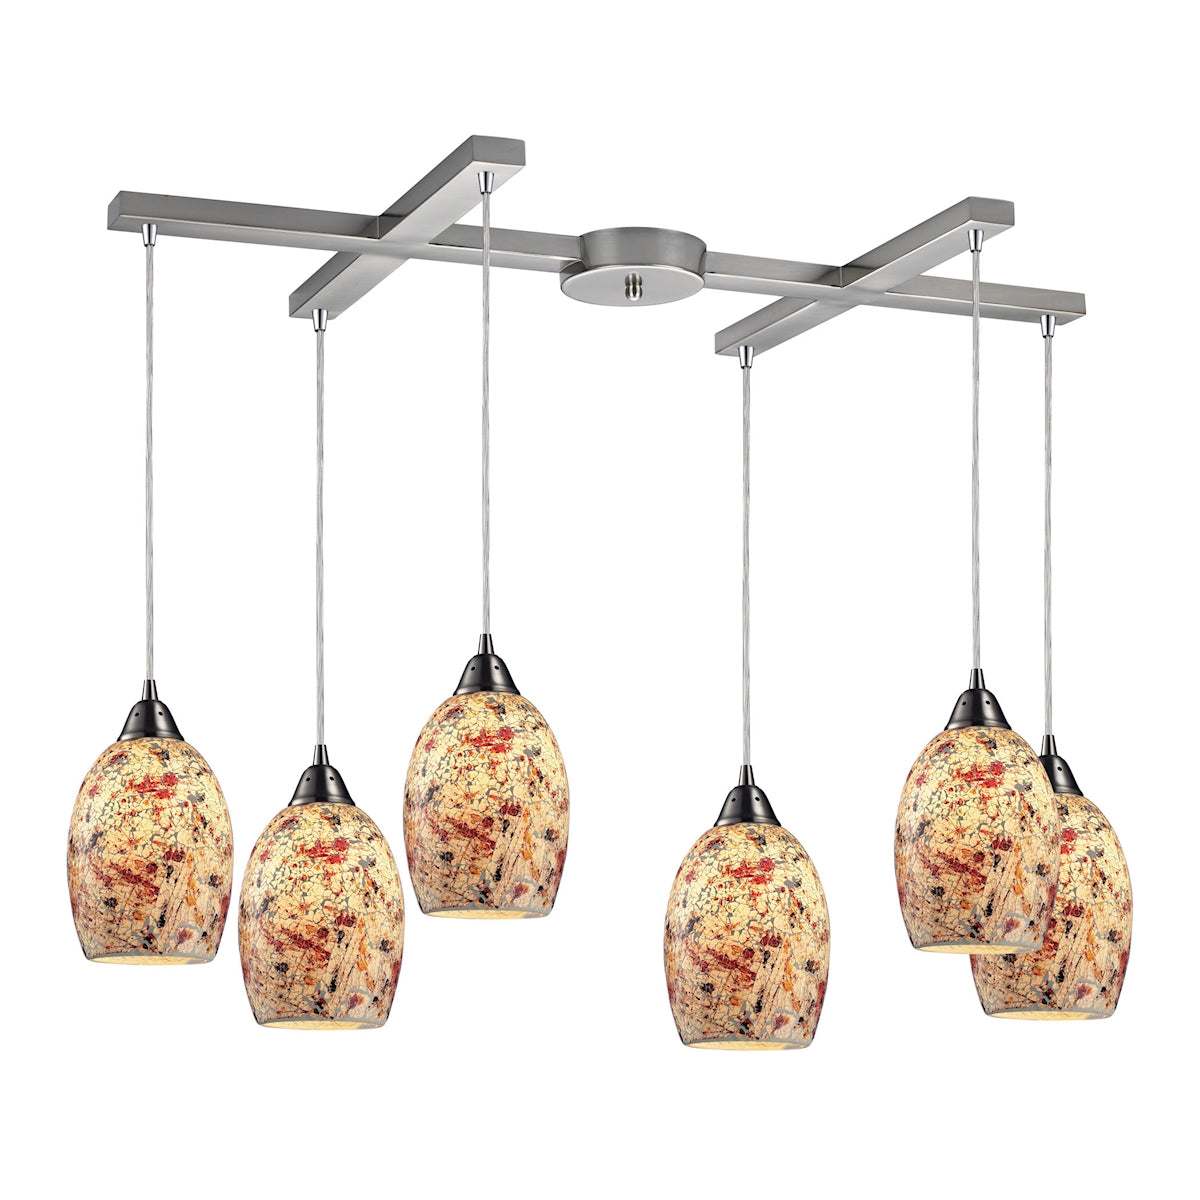 ELK Lighting 73011-6 Avalon 6-Light H-Bar Pendant Fixture in Satin Nickel with Multi-colored Crackle Glass